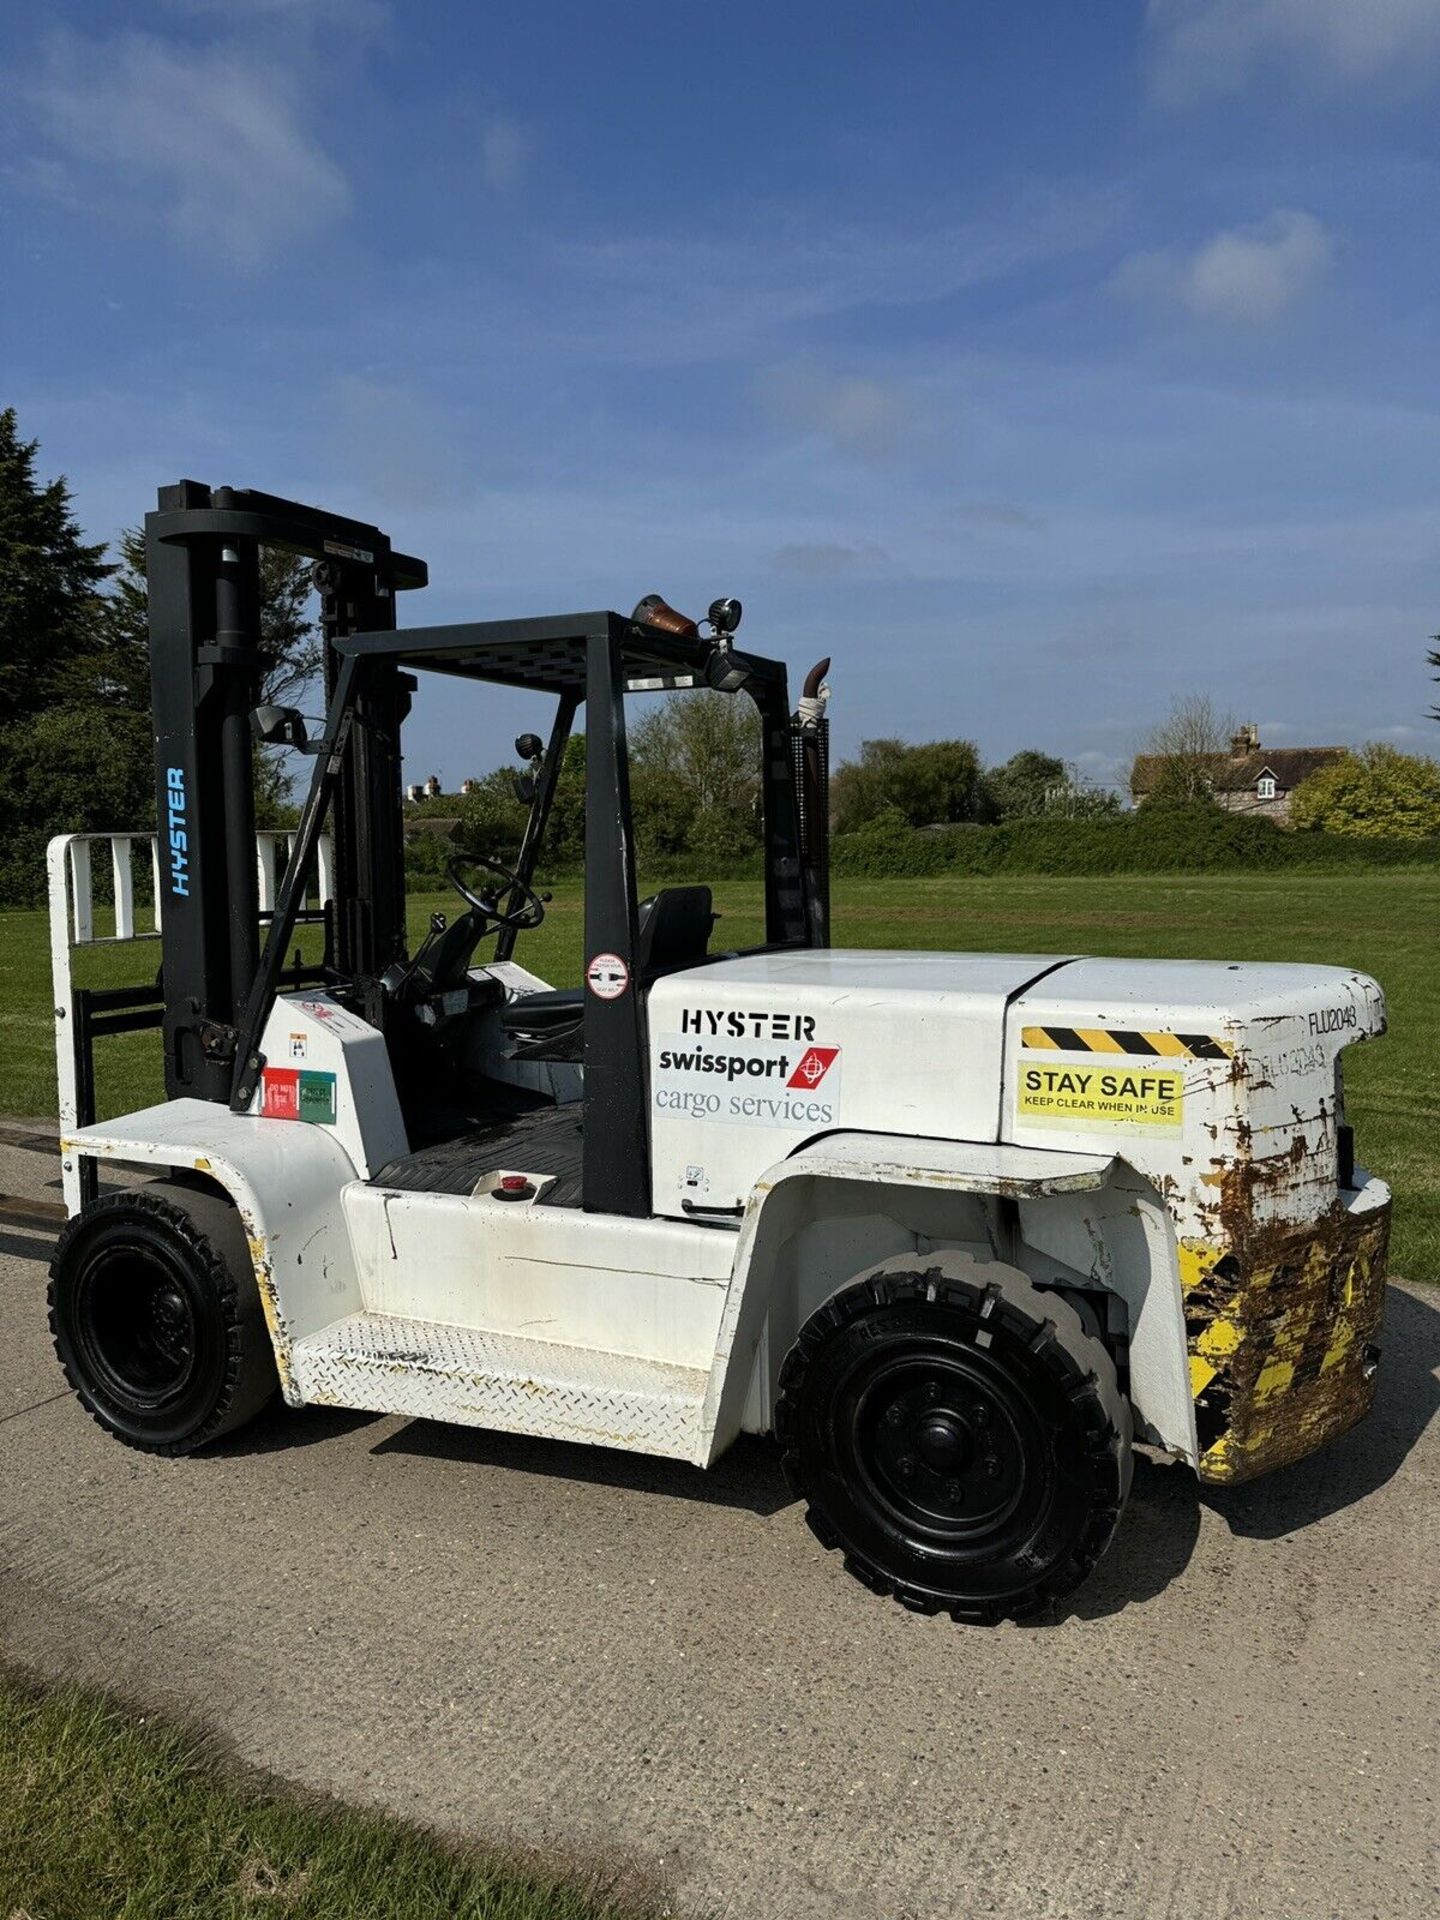 1996, HYSTER - 7 Tonne Diesel Forklift Truck (Direct from Airport) 3500 hours - Image 5 of 6